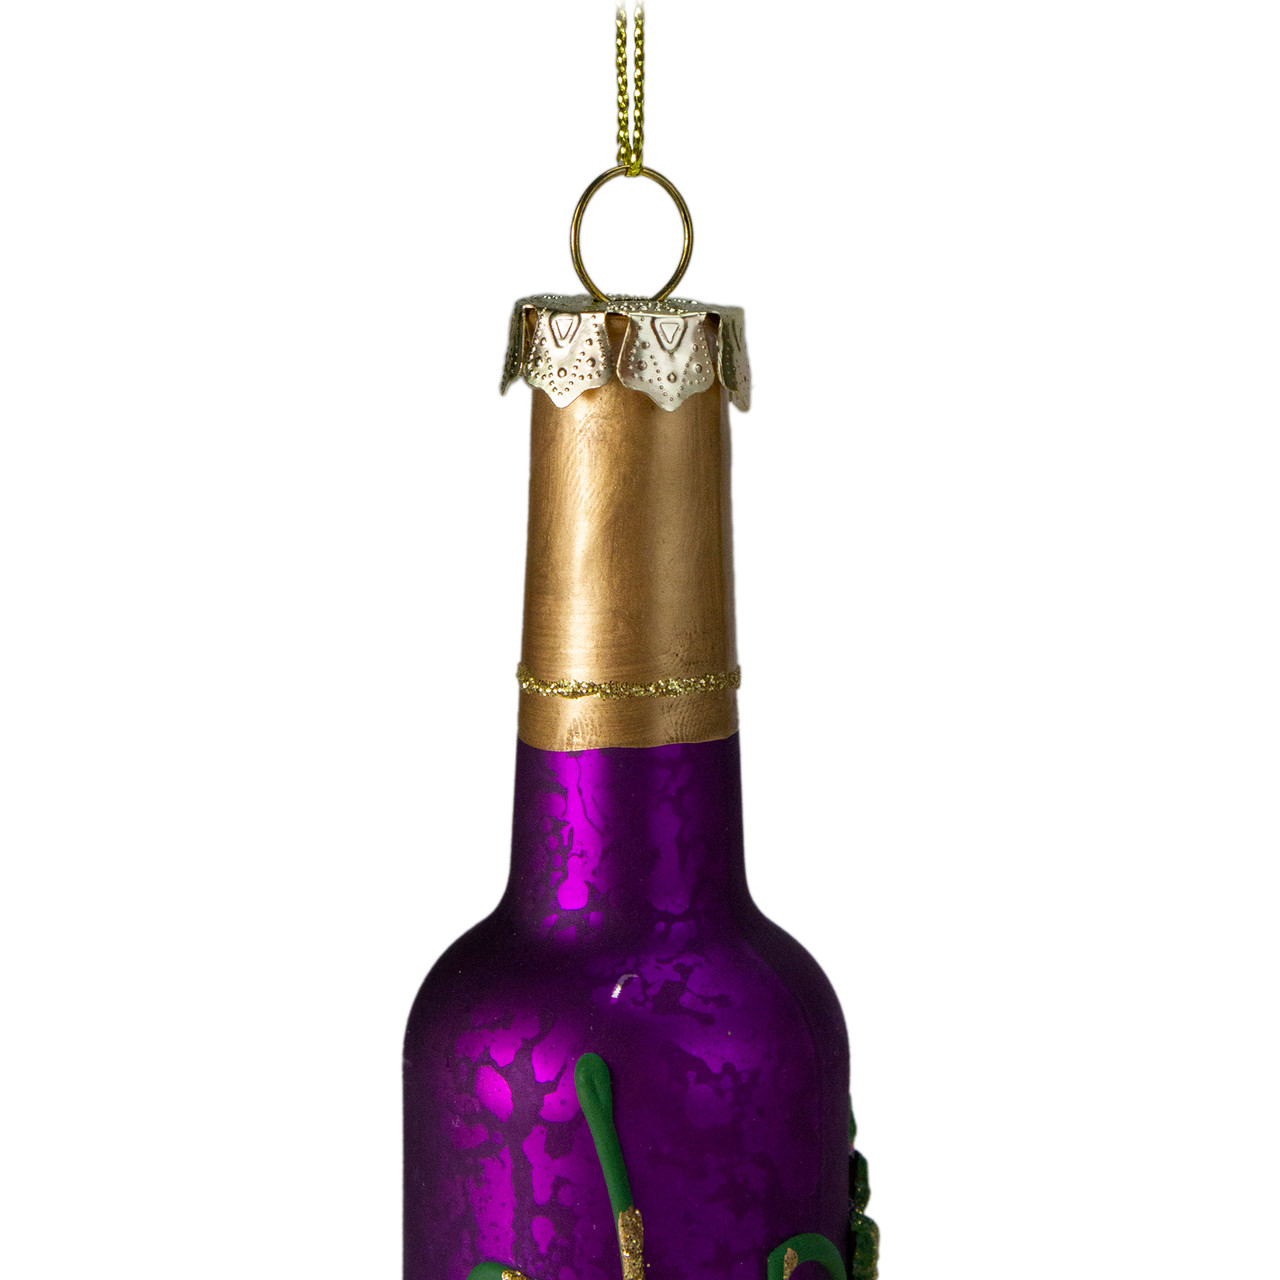 Northlight 4 Mulled Wine Glass Christmas Ornament 